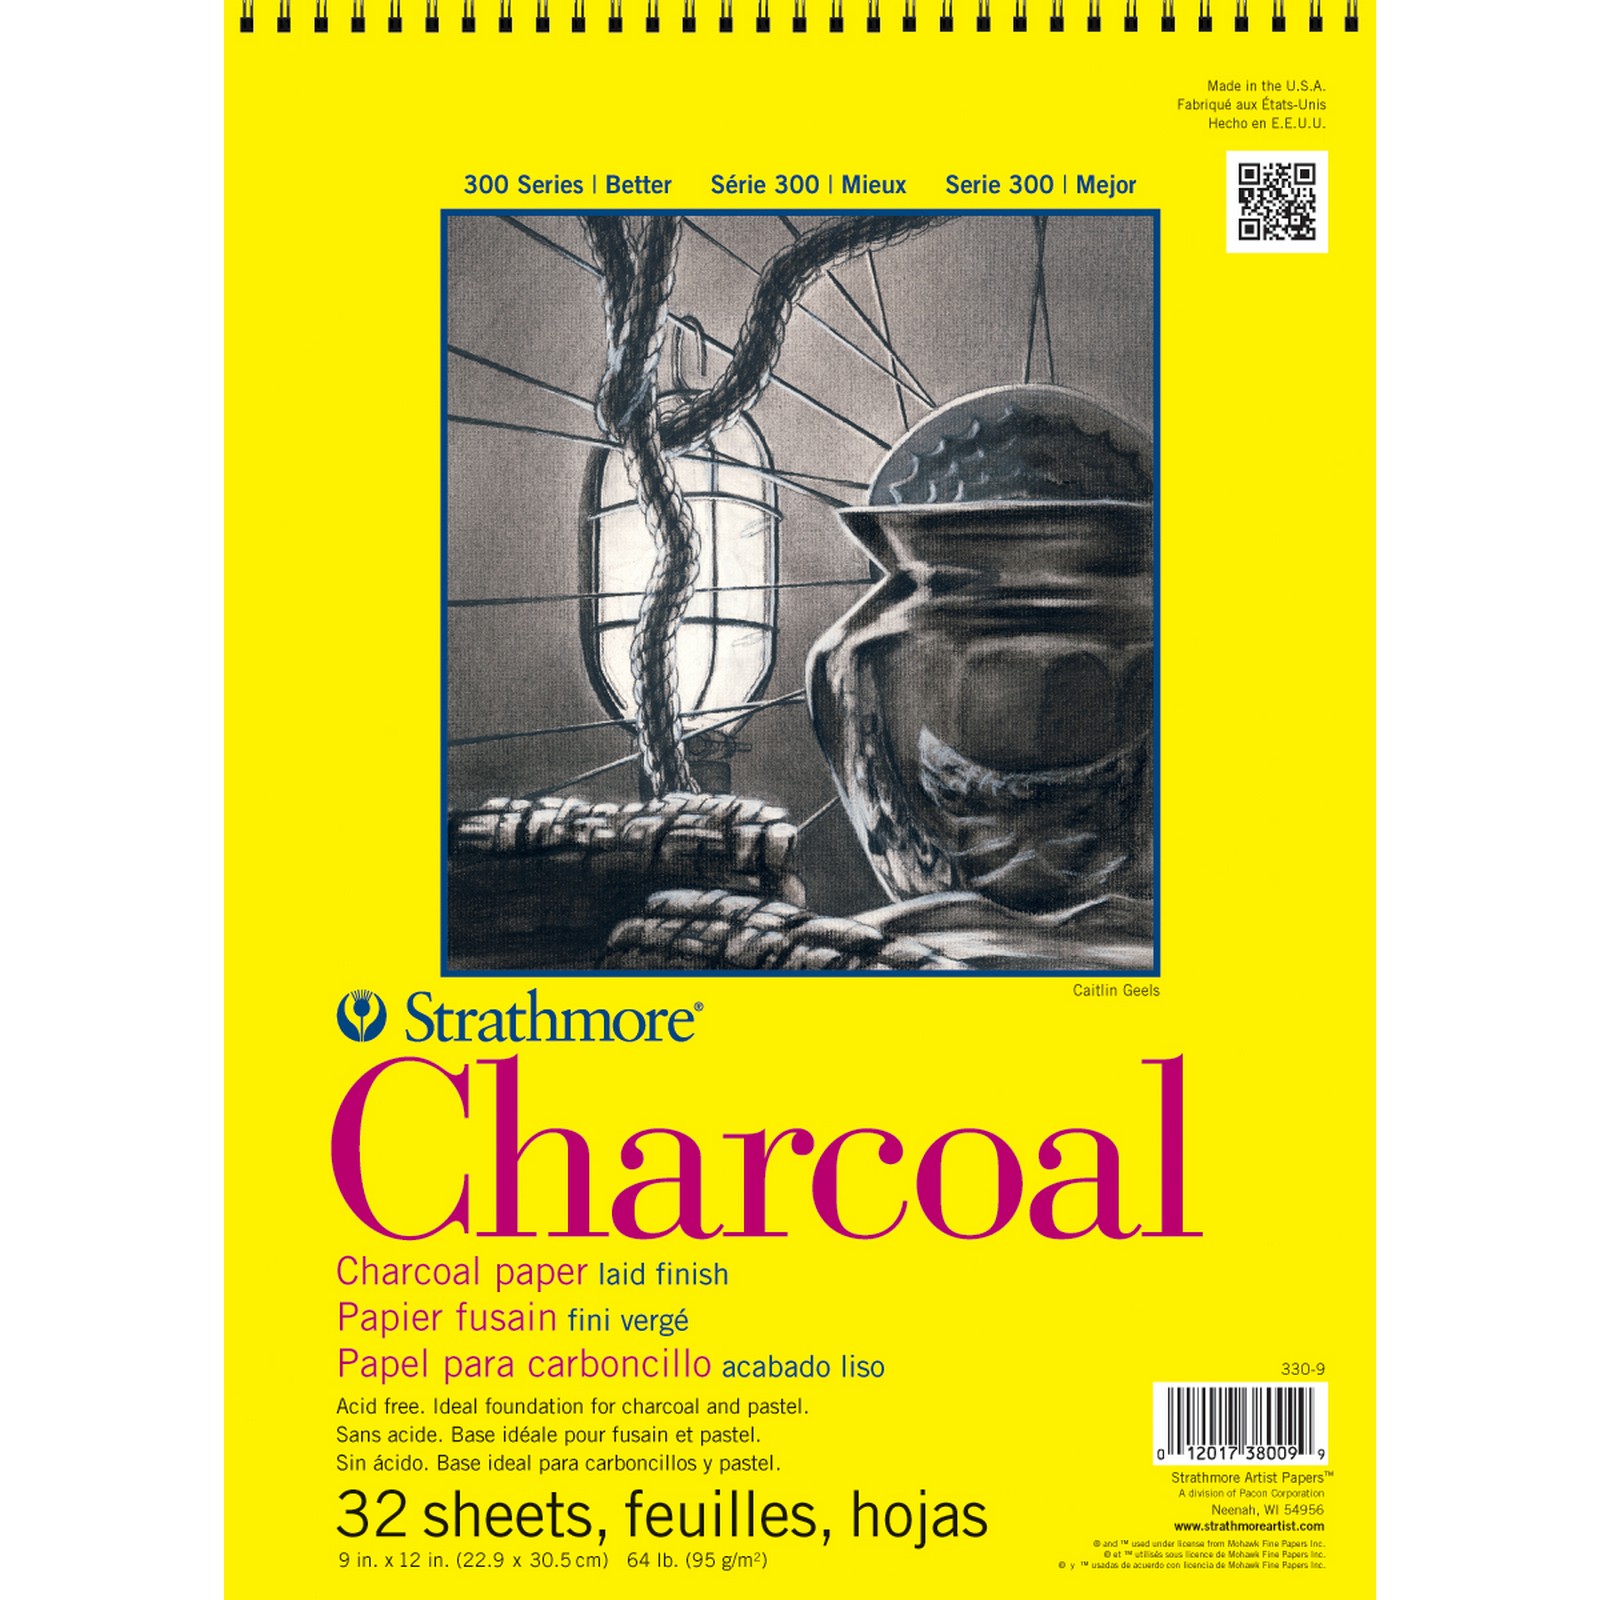 Strathmore Charcoal Spiral Paper Pad 9"X12" 32 Sheets